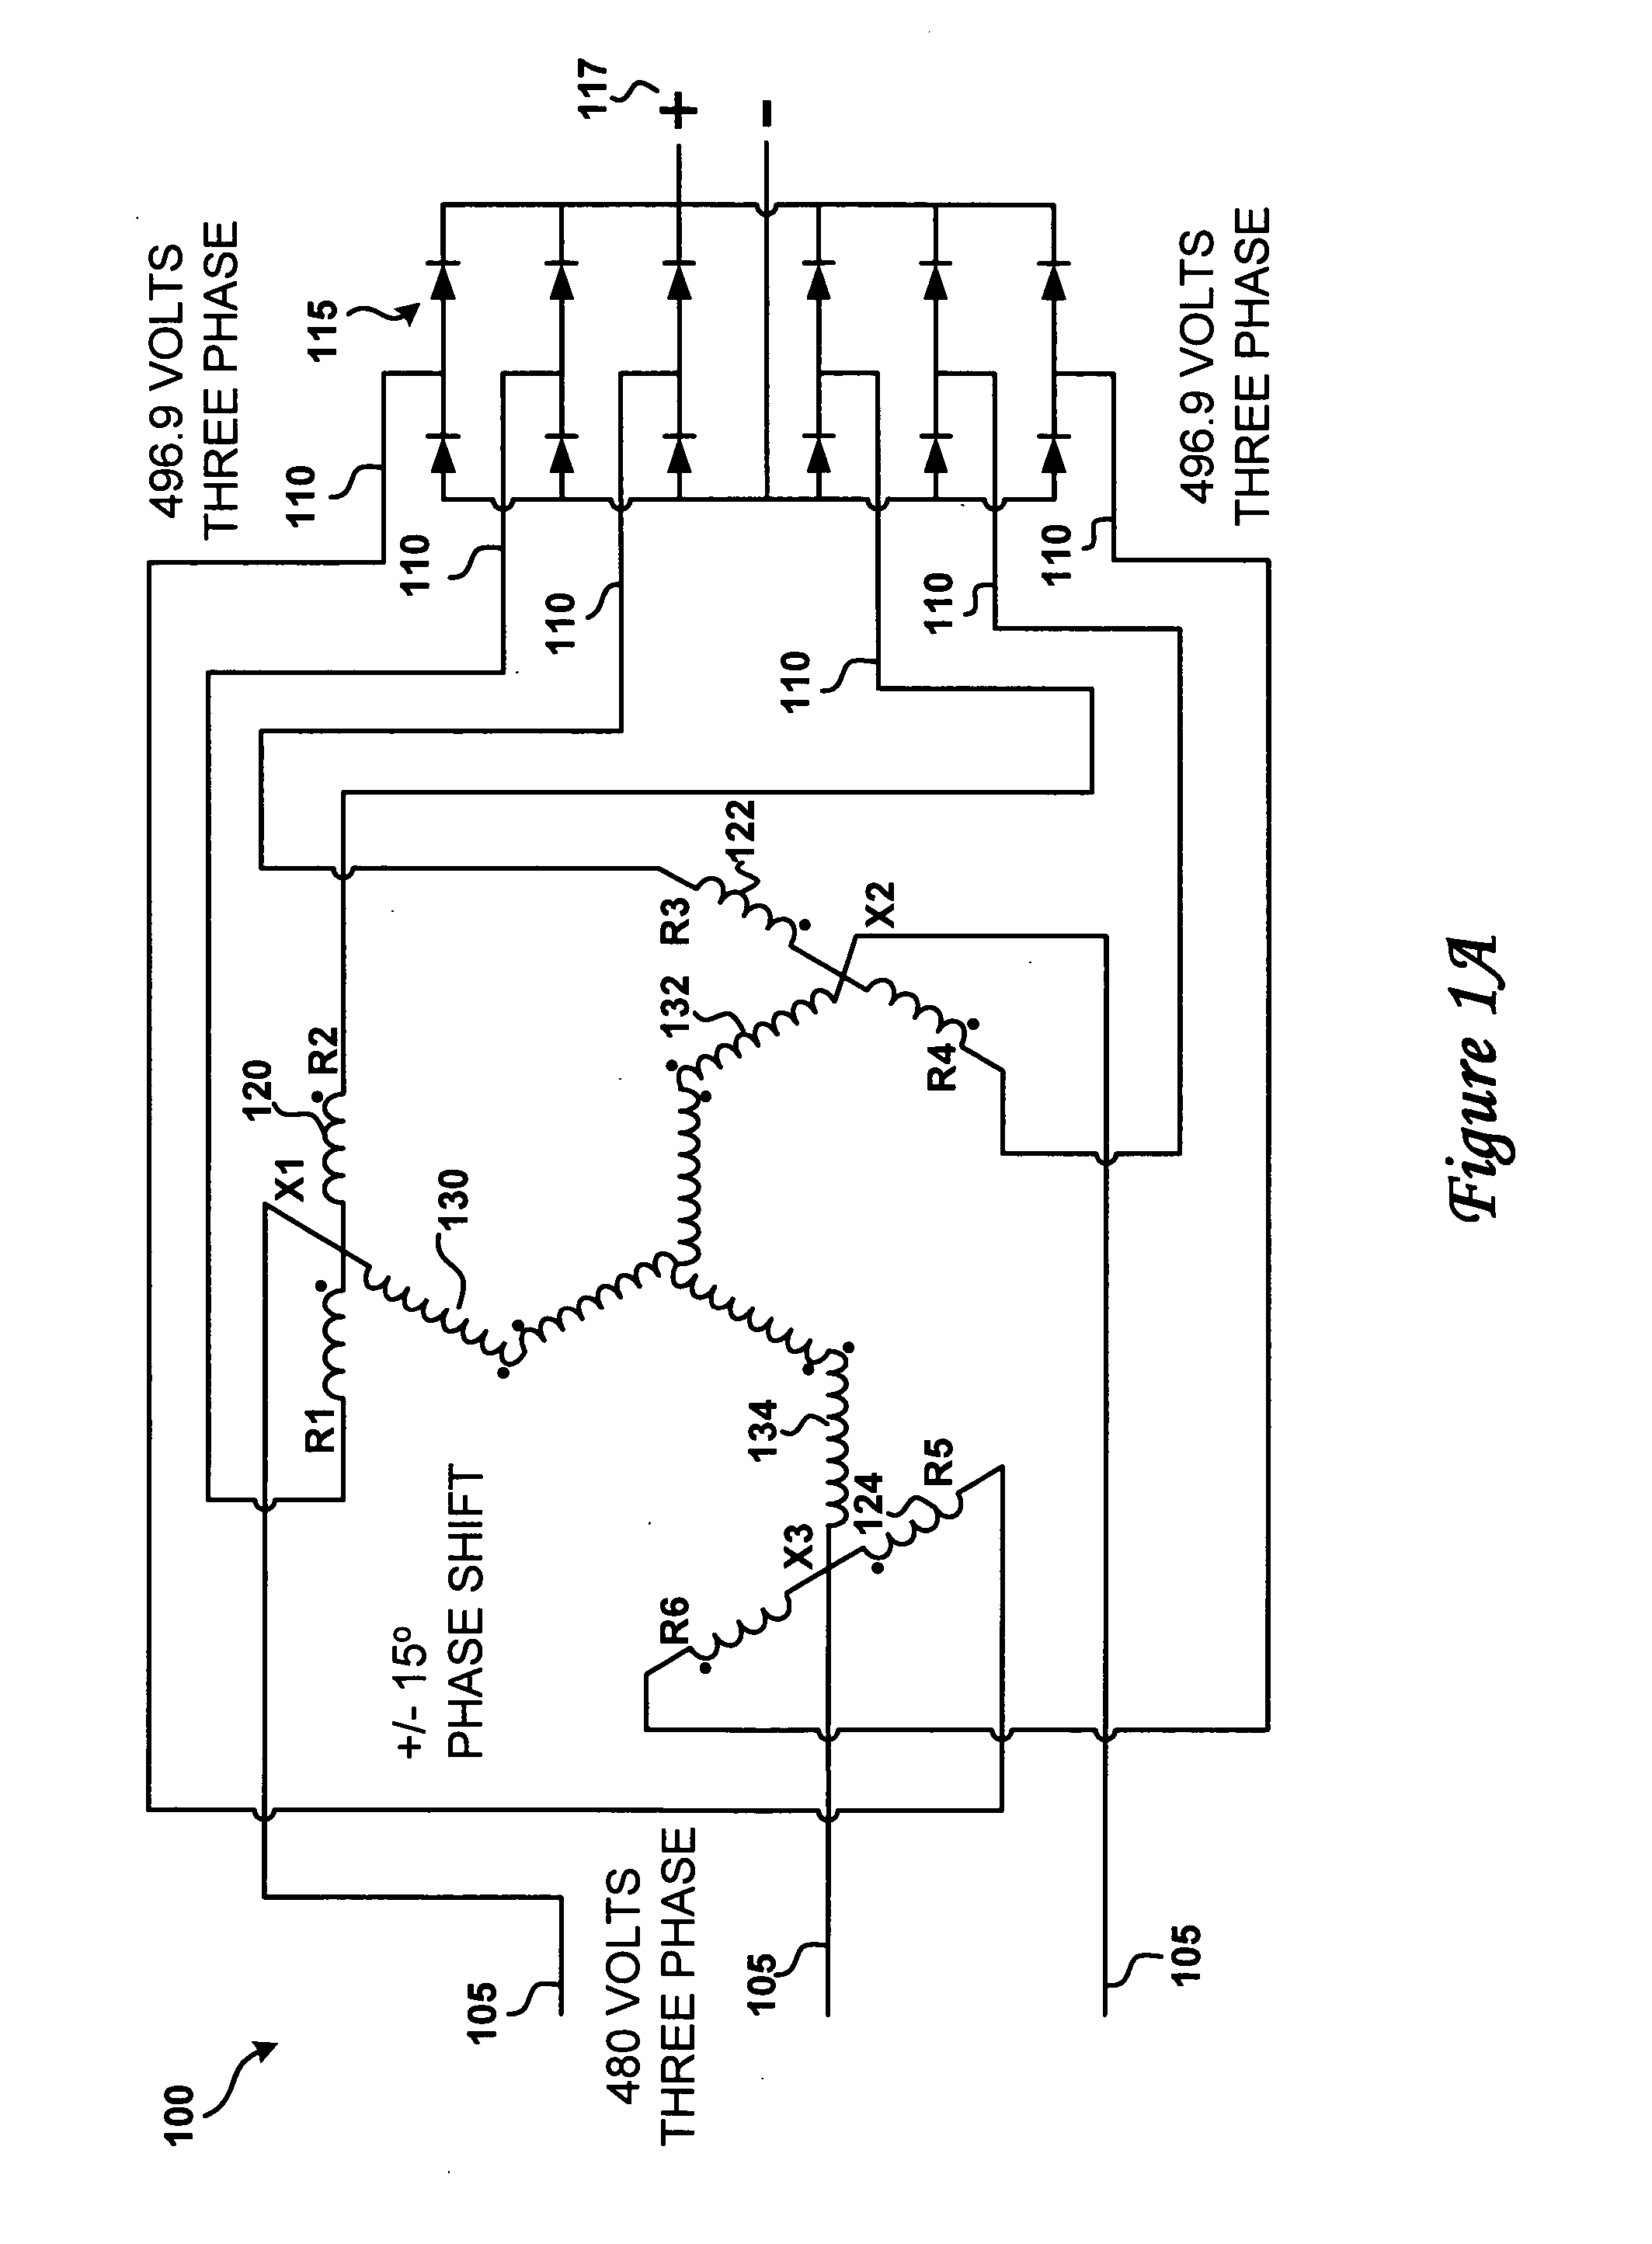 Auto-transformer for use with multiple pulse rectifiers